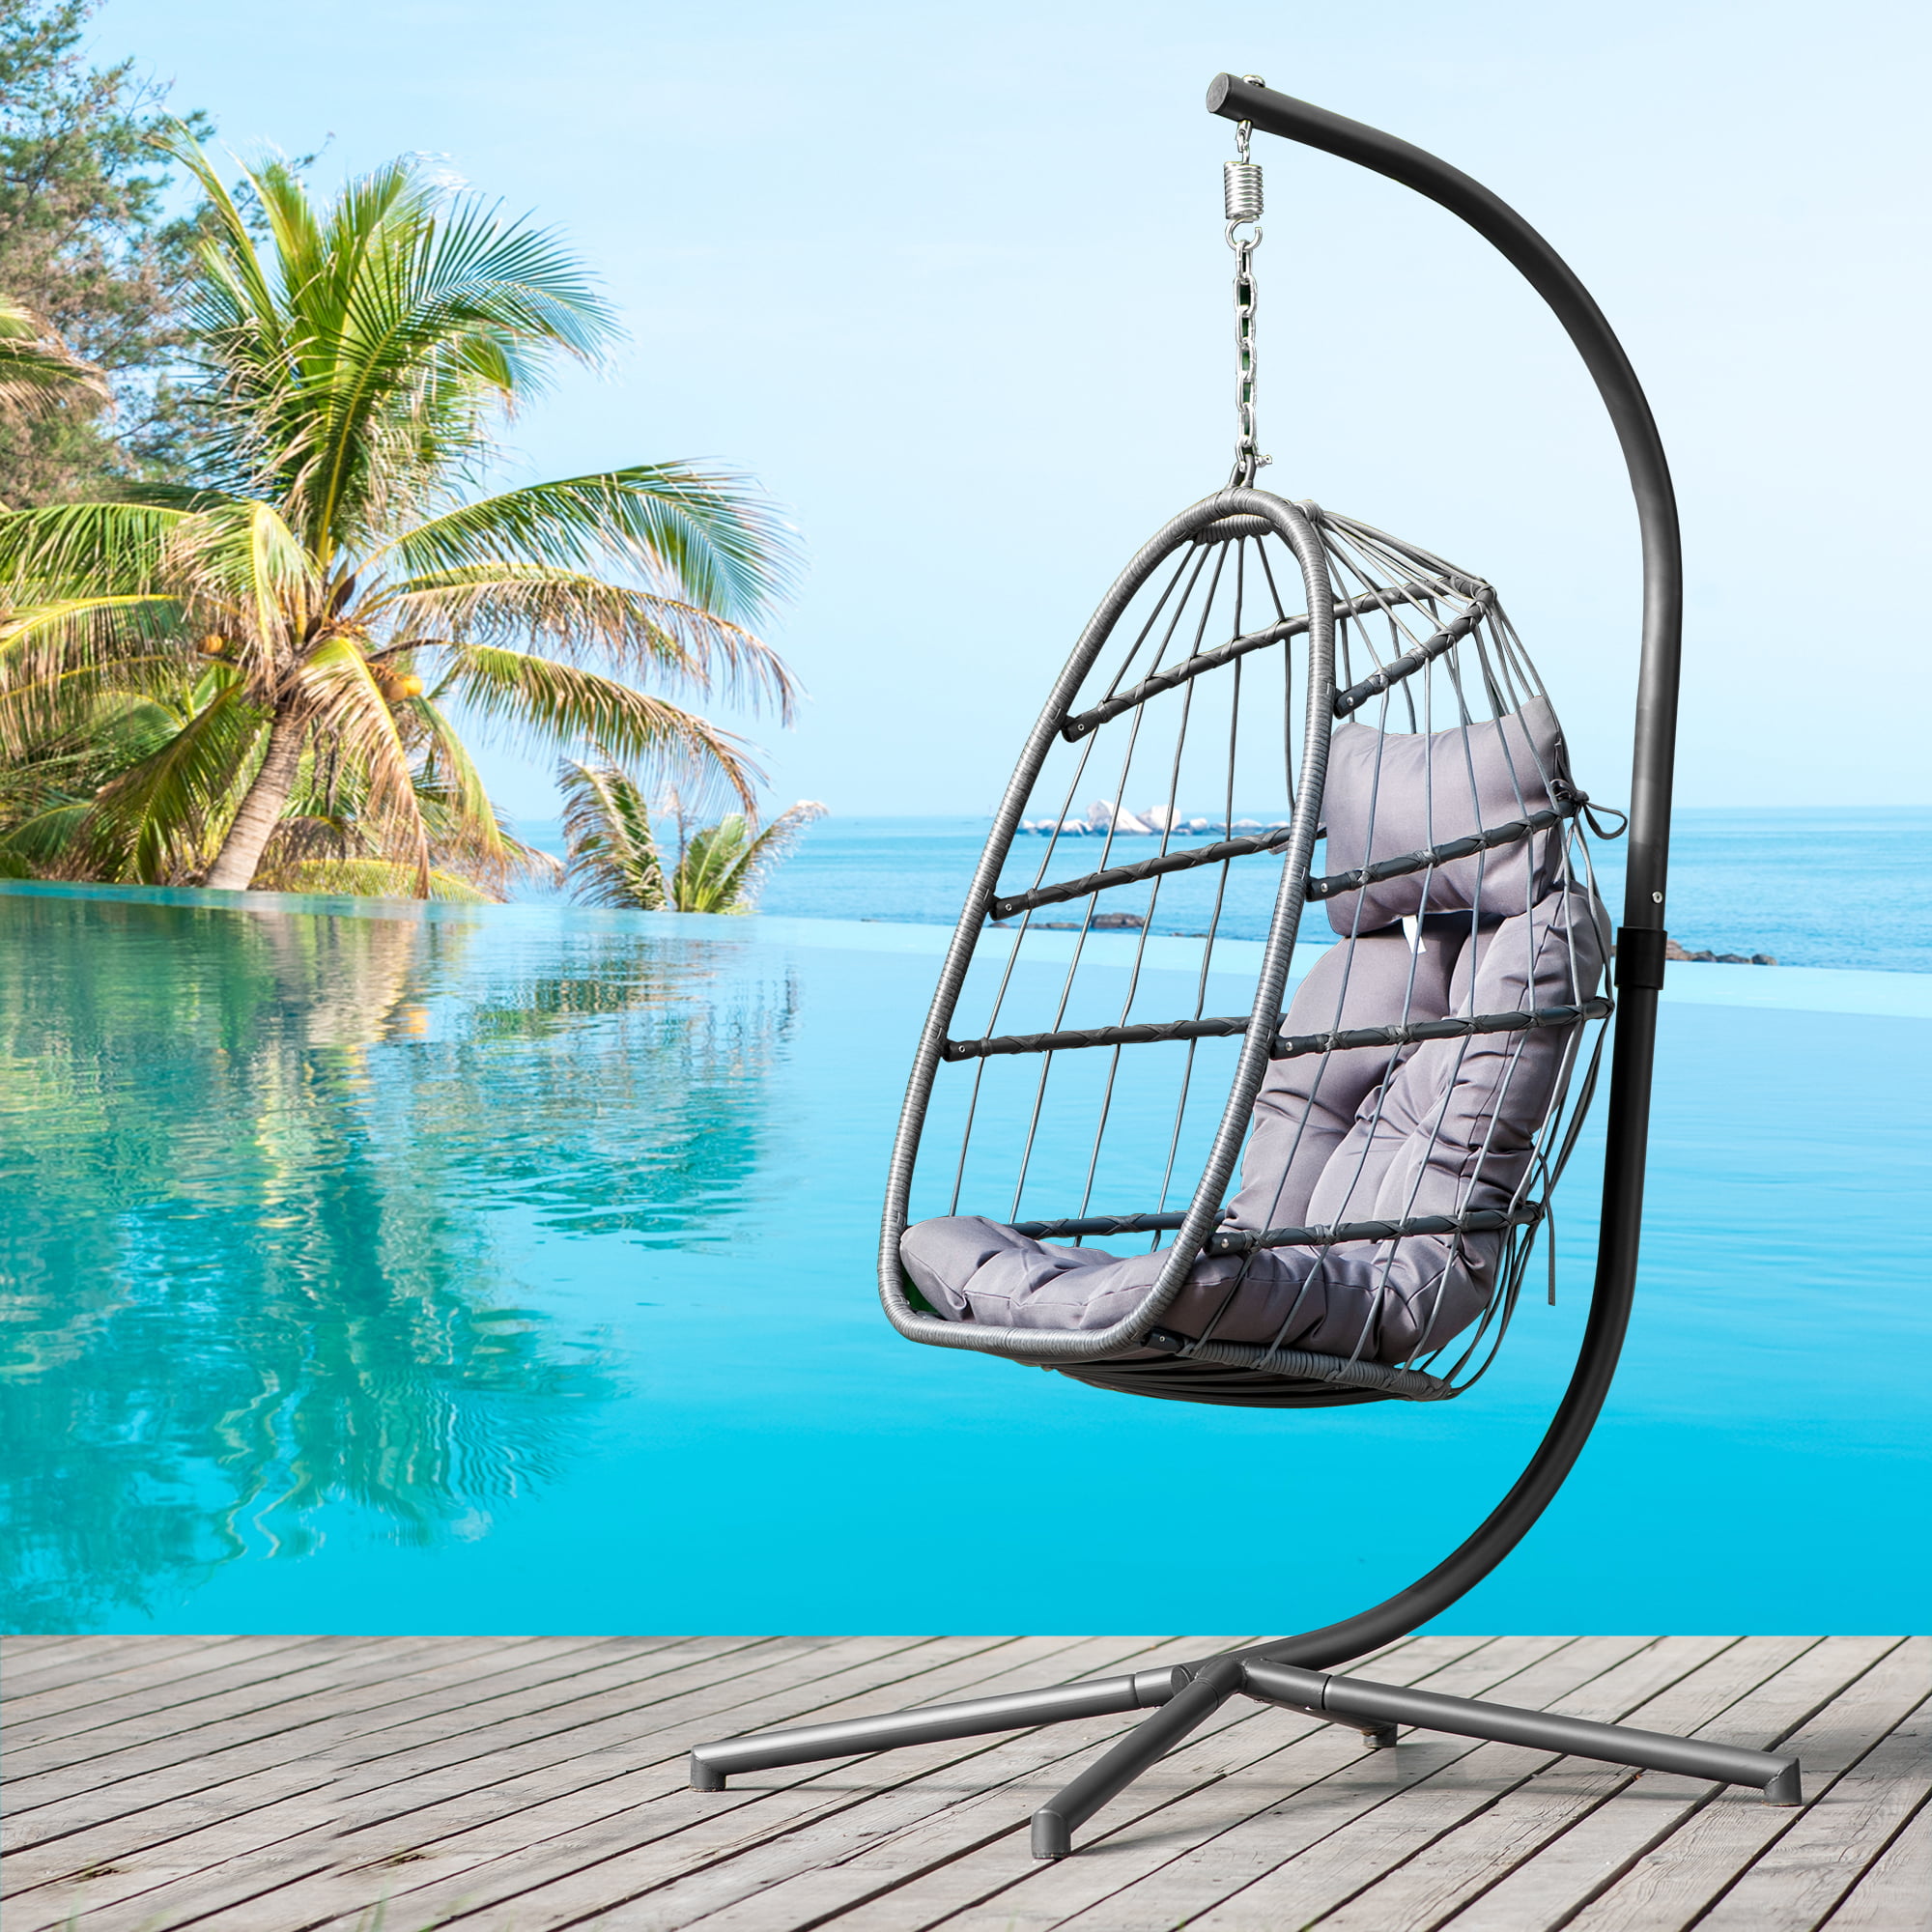 UHOMEPRO Hanging Egg Chair with Stand, Wicker Outdoor Patio Furniture